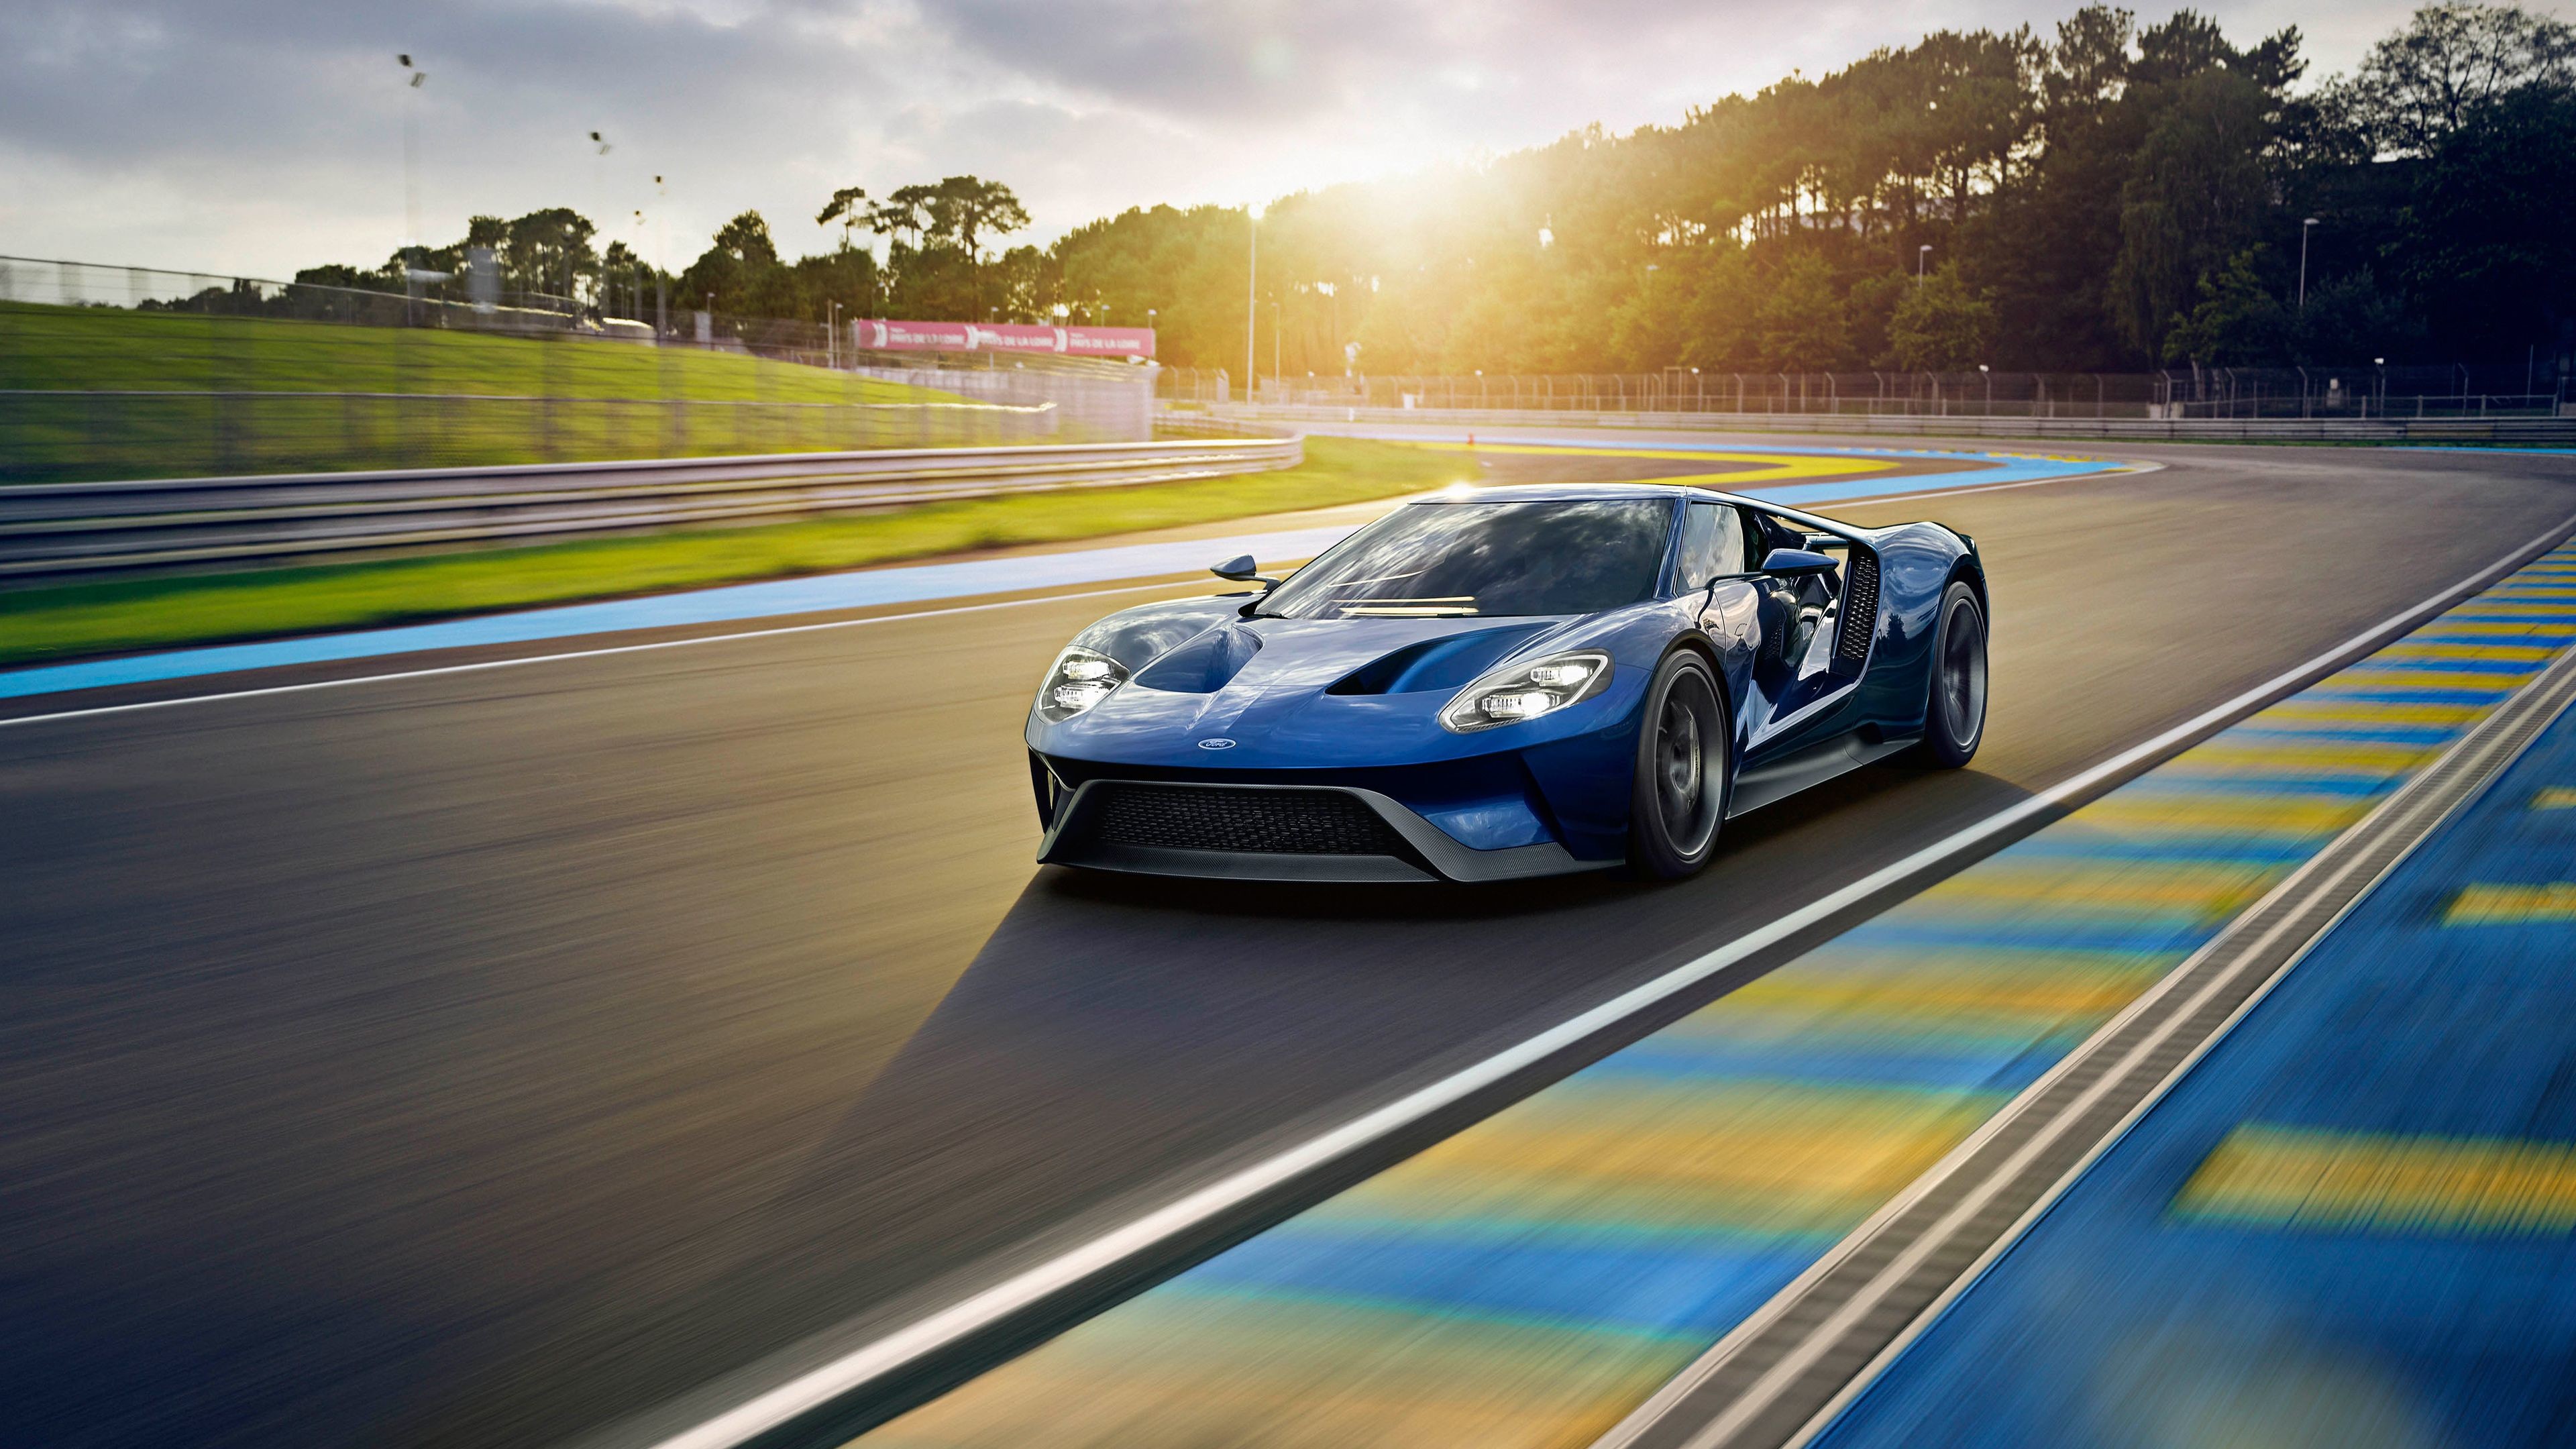 Wallpaper  Ford GT muscle car vehicle mist Ford GT40 spotlights  2880x1800  LetKevin  1834913  HD Wallpapers  WallHere